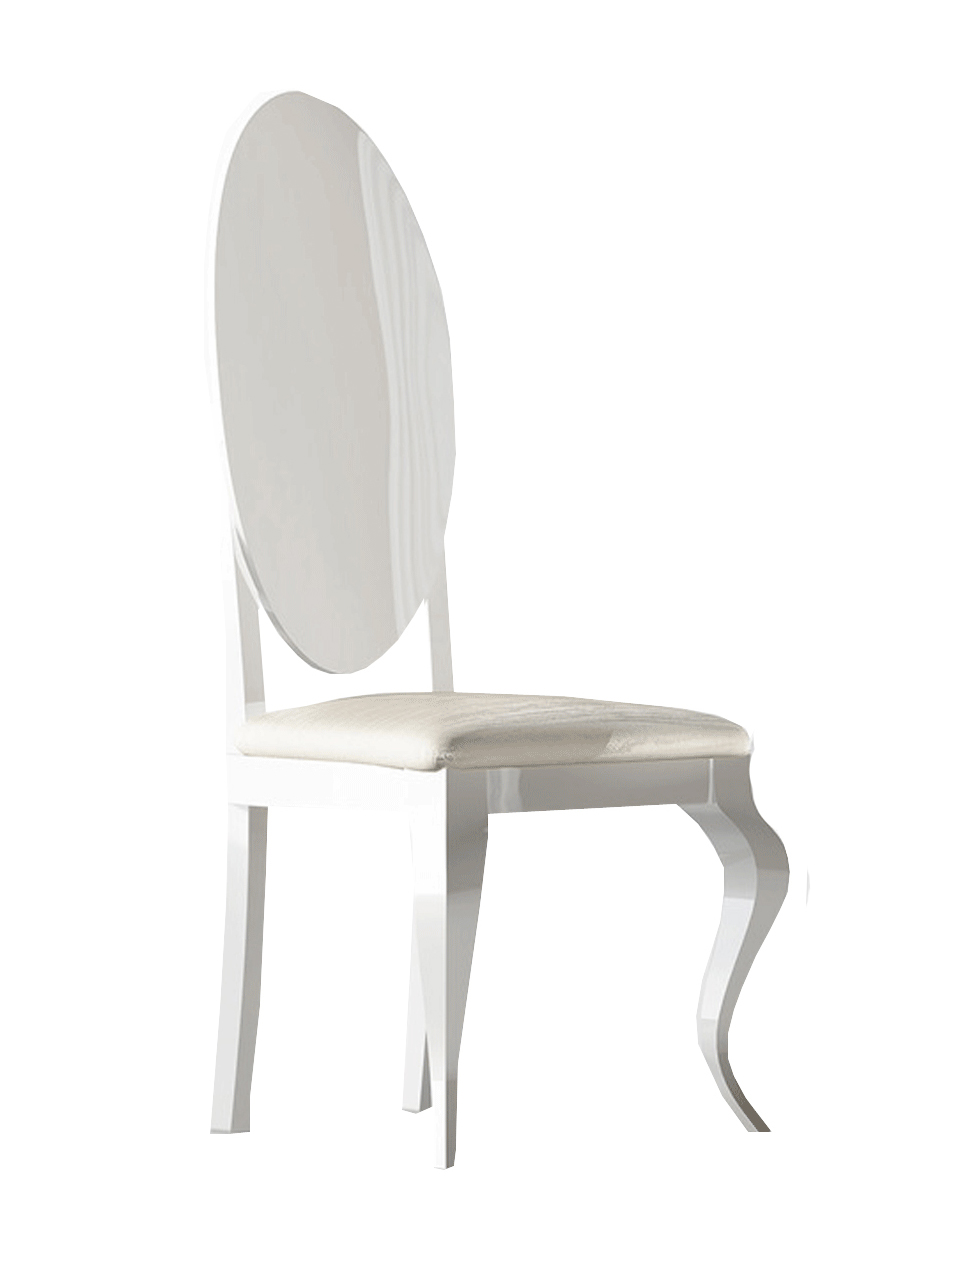 Wallunits Hallway Console tables and Mirrors Carmen Arm and side White chair